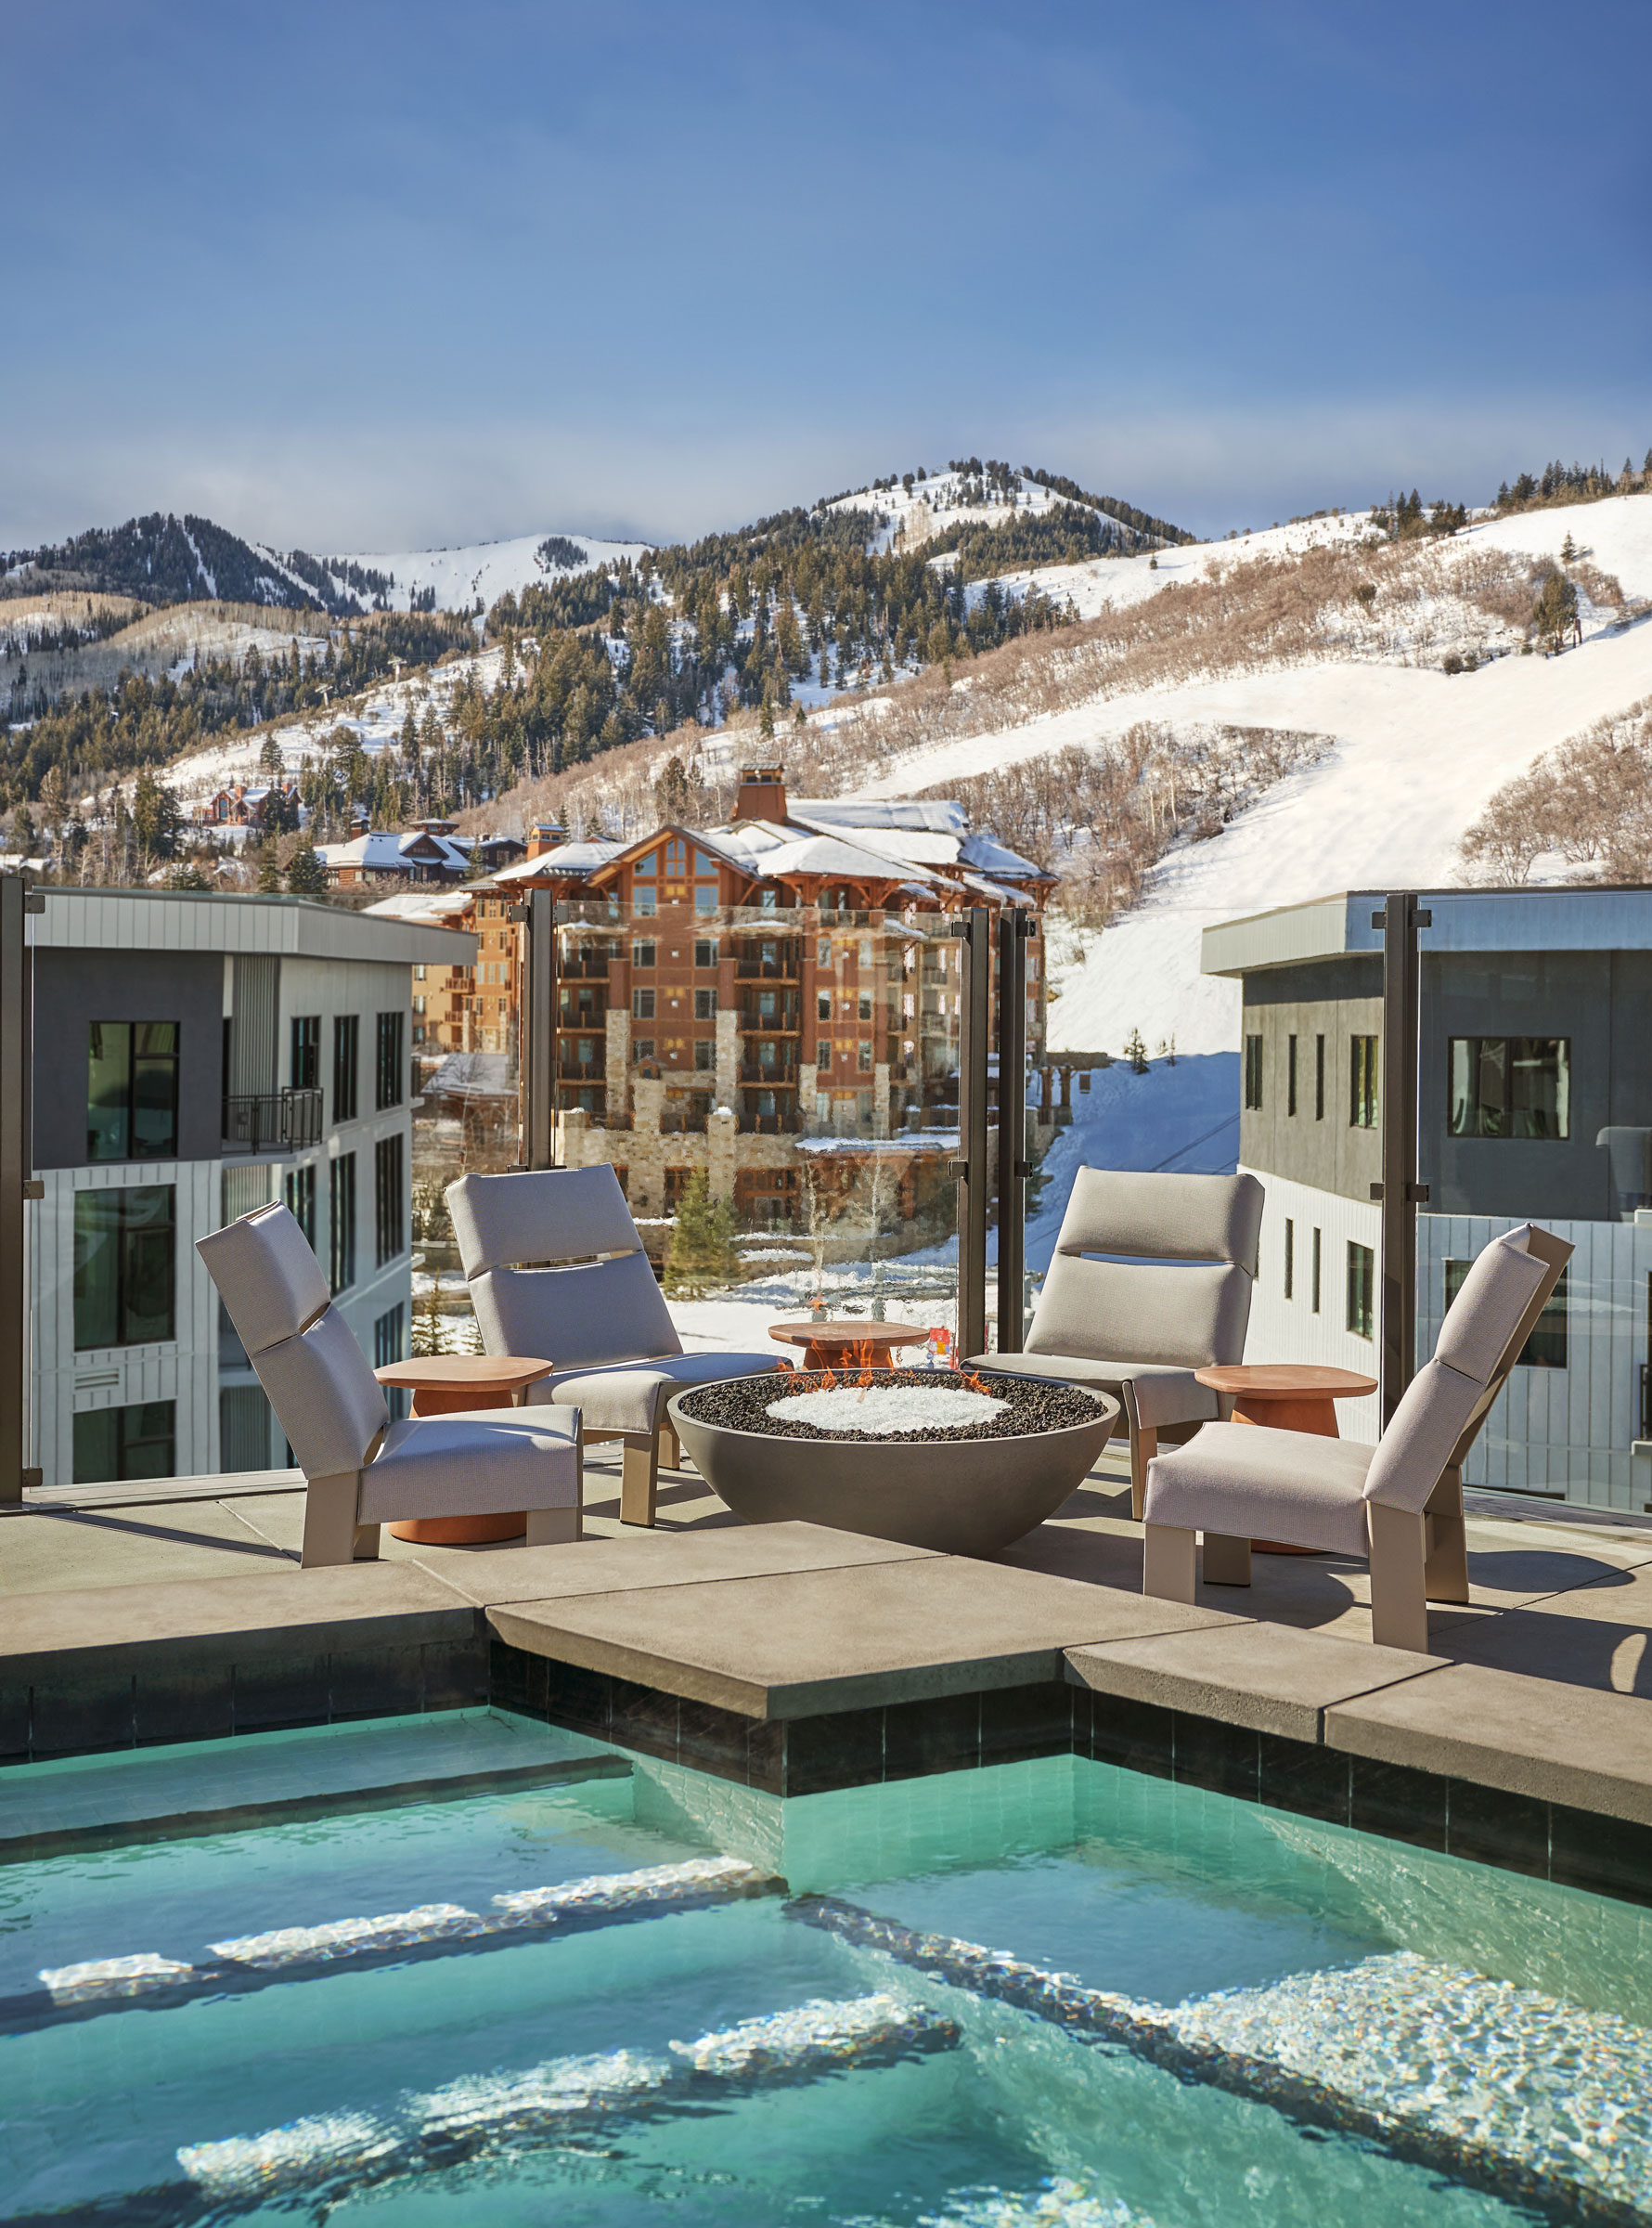 The Pool House at Pendry Park City in Park City, Utah. (Pendry Park City)